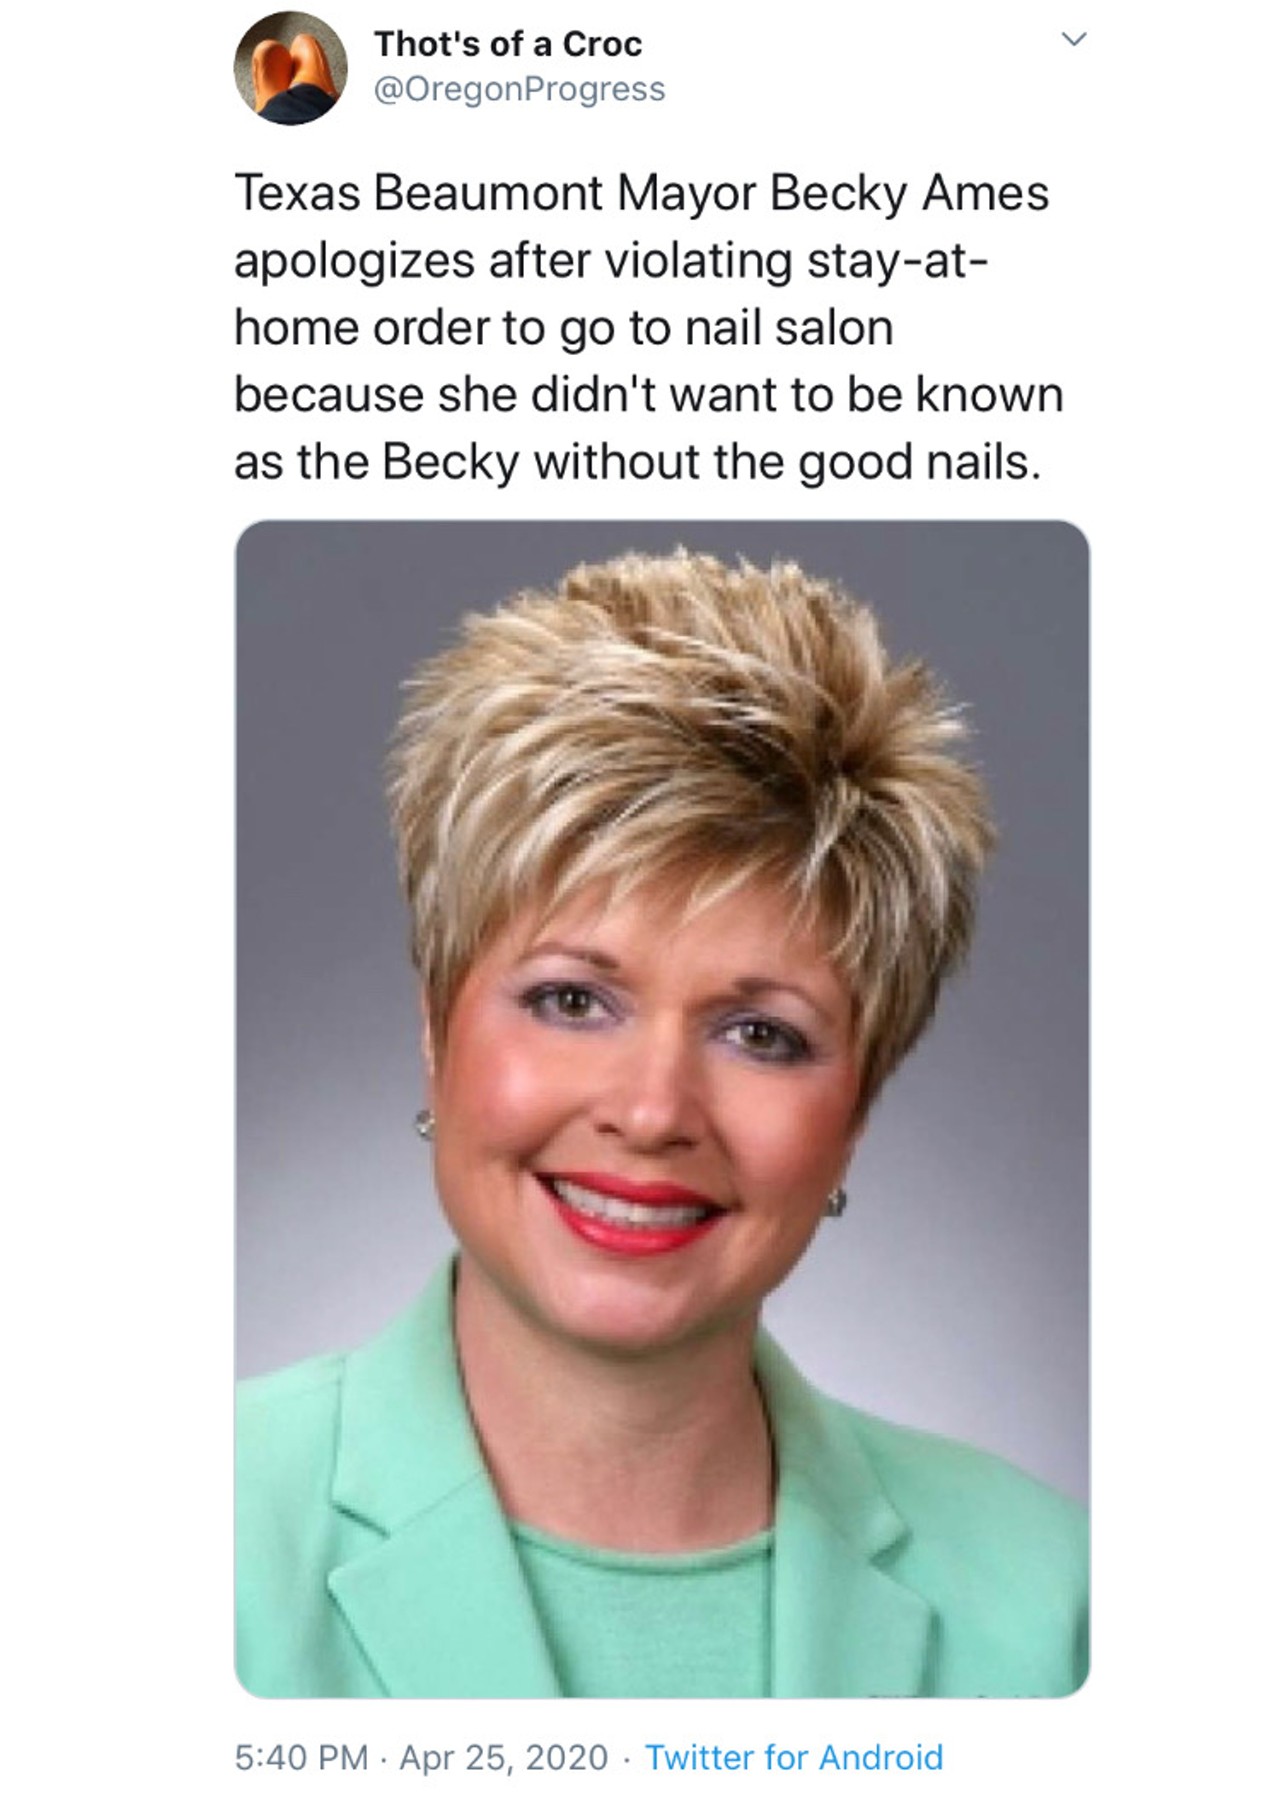 Picture of Beaumont Mayor at nail salon goes viral | 12newsnow.com